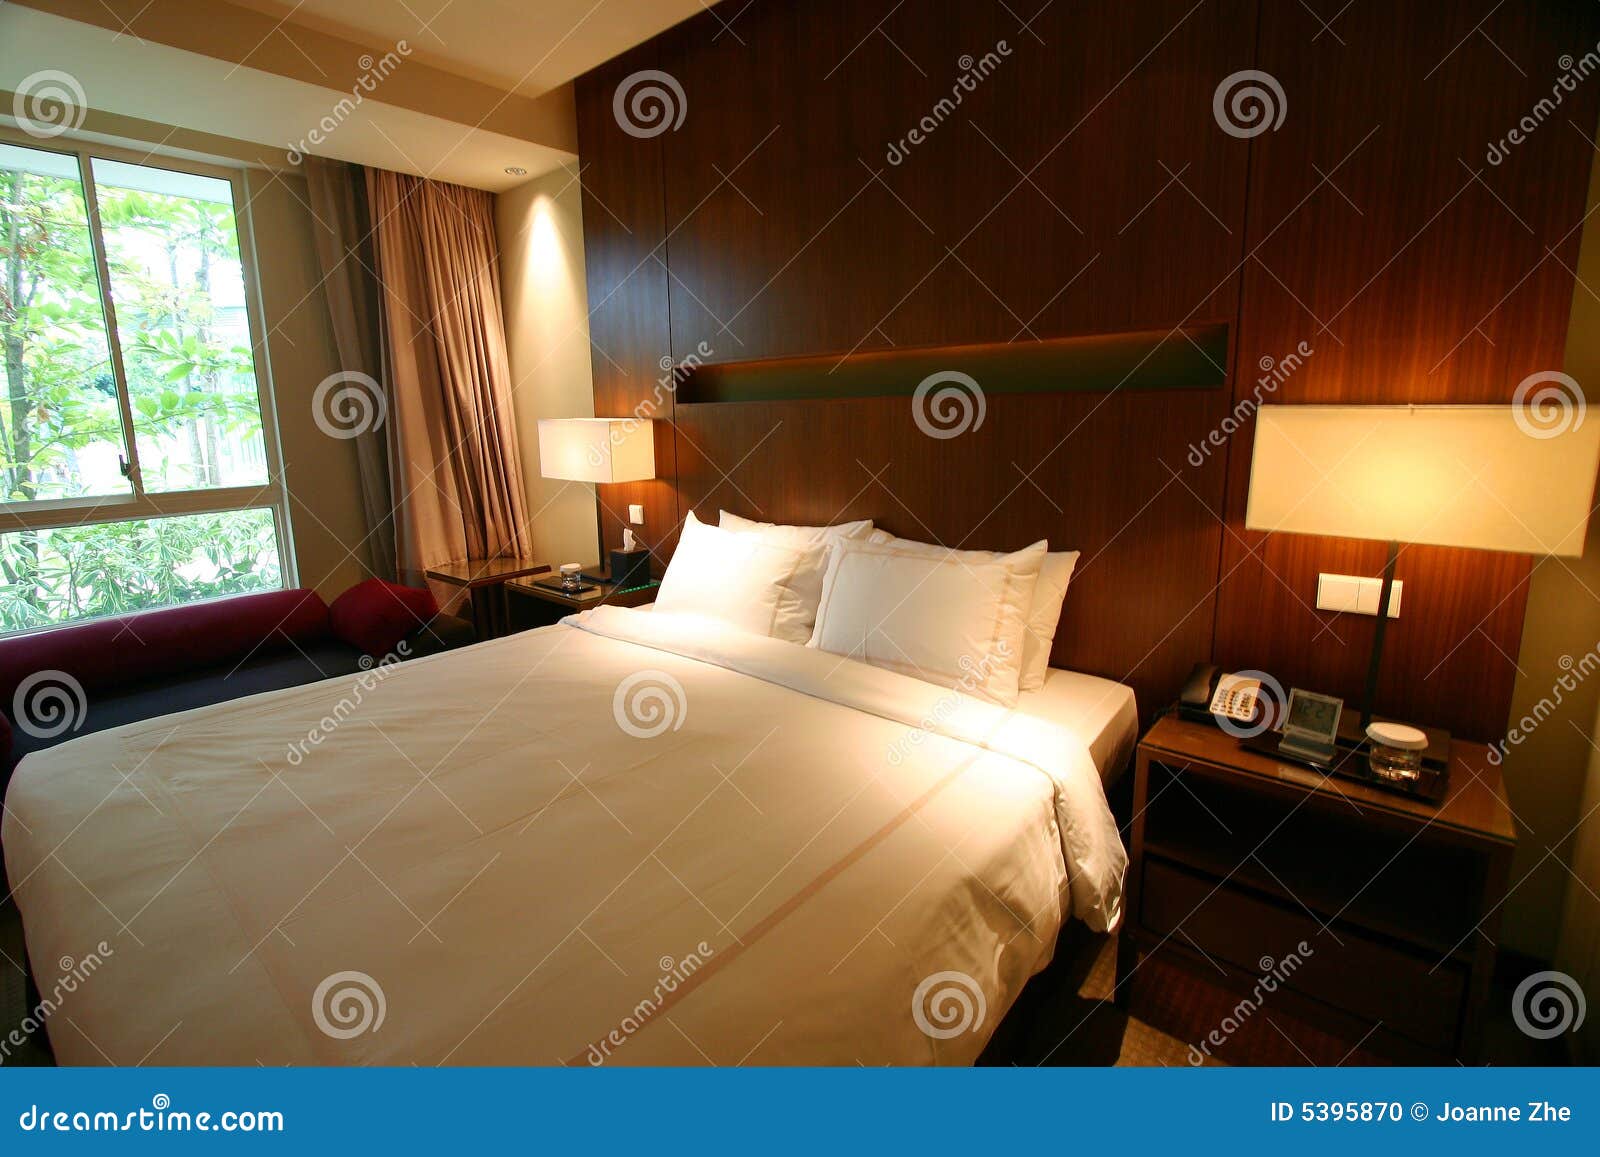 Hotel Bedroom Interior With Double Bed Stock Photo Image